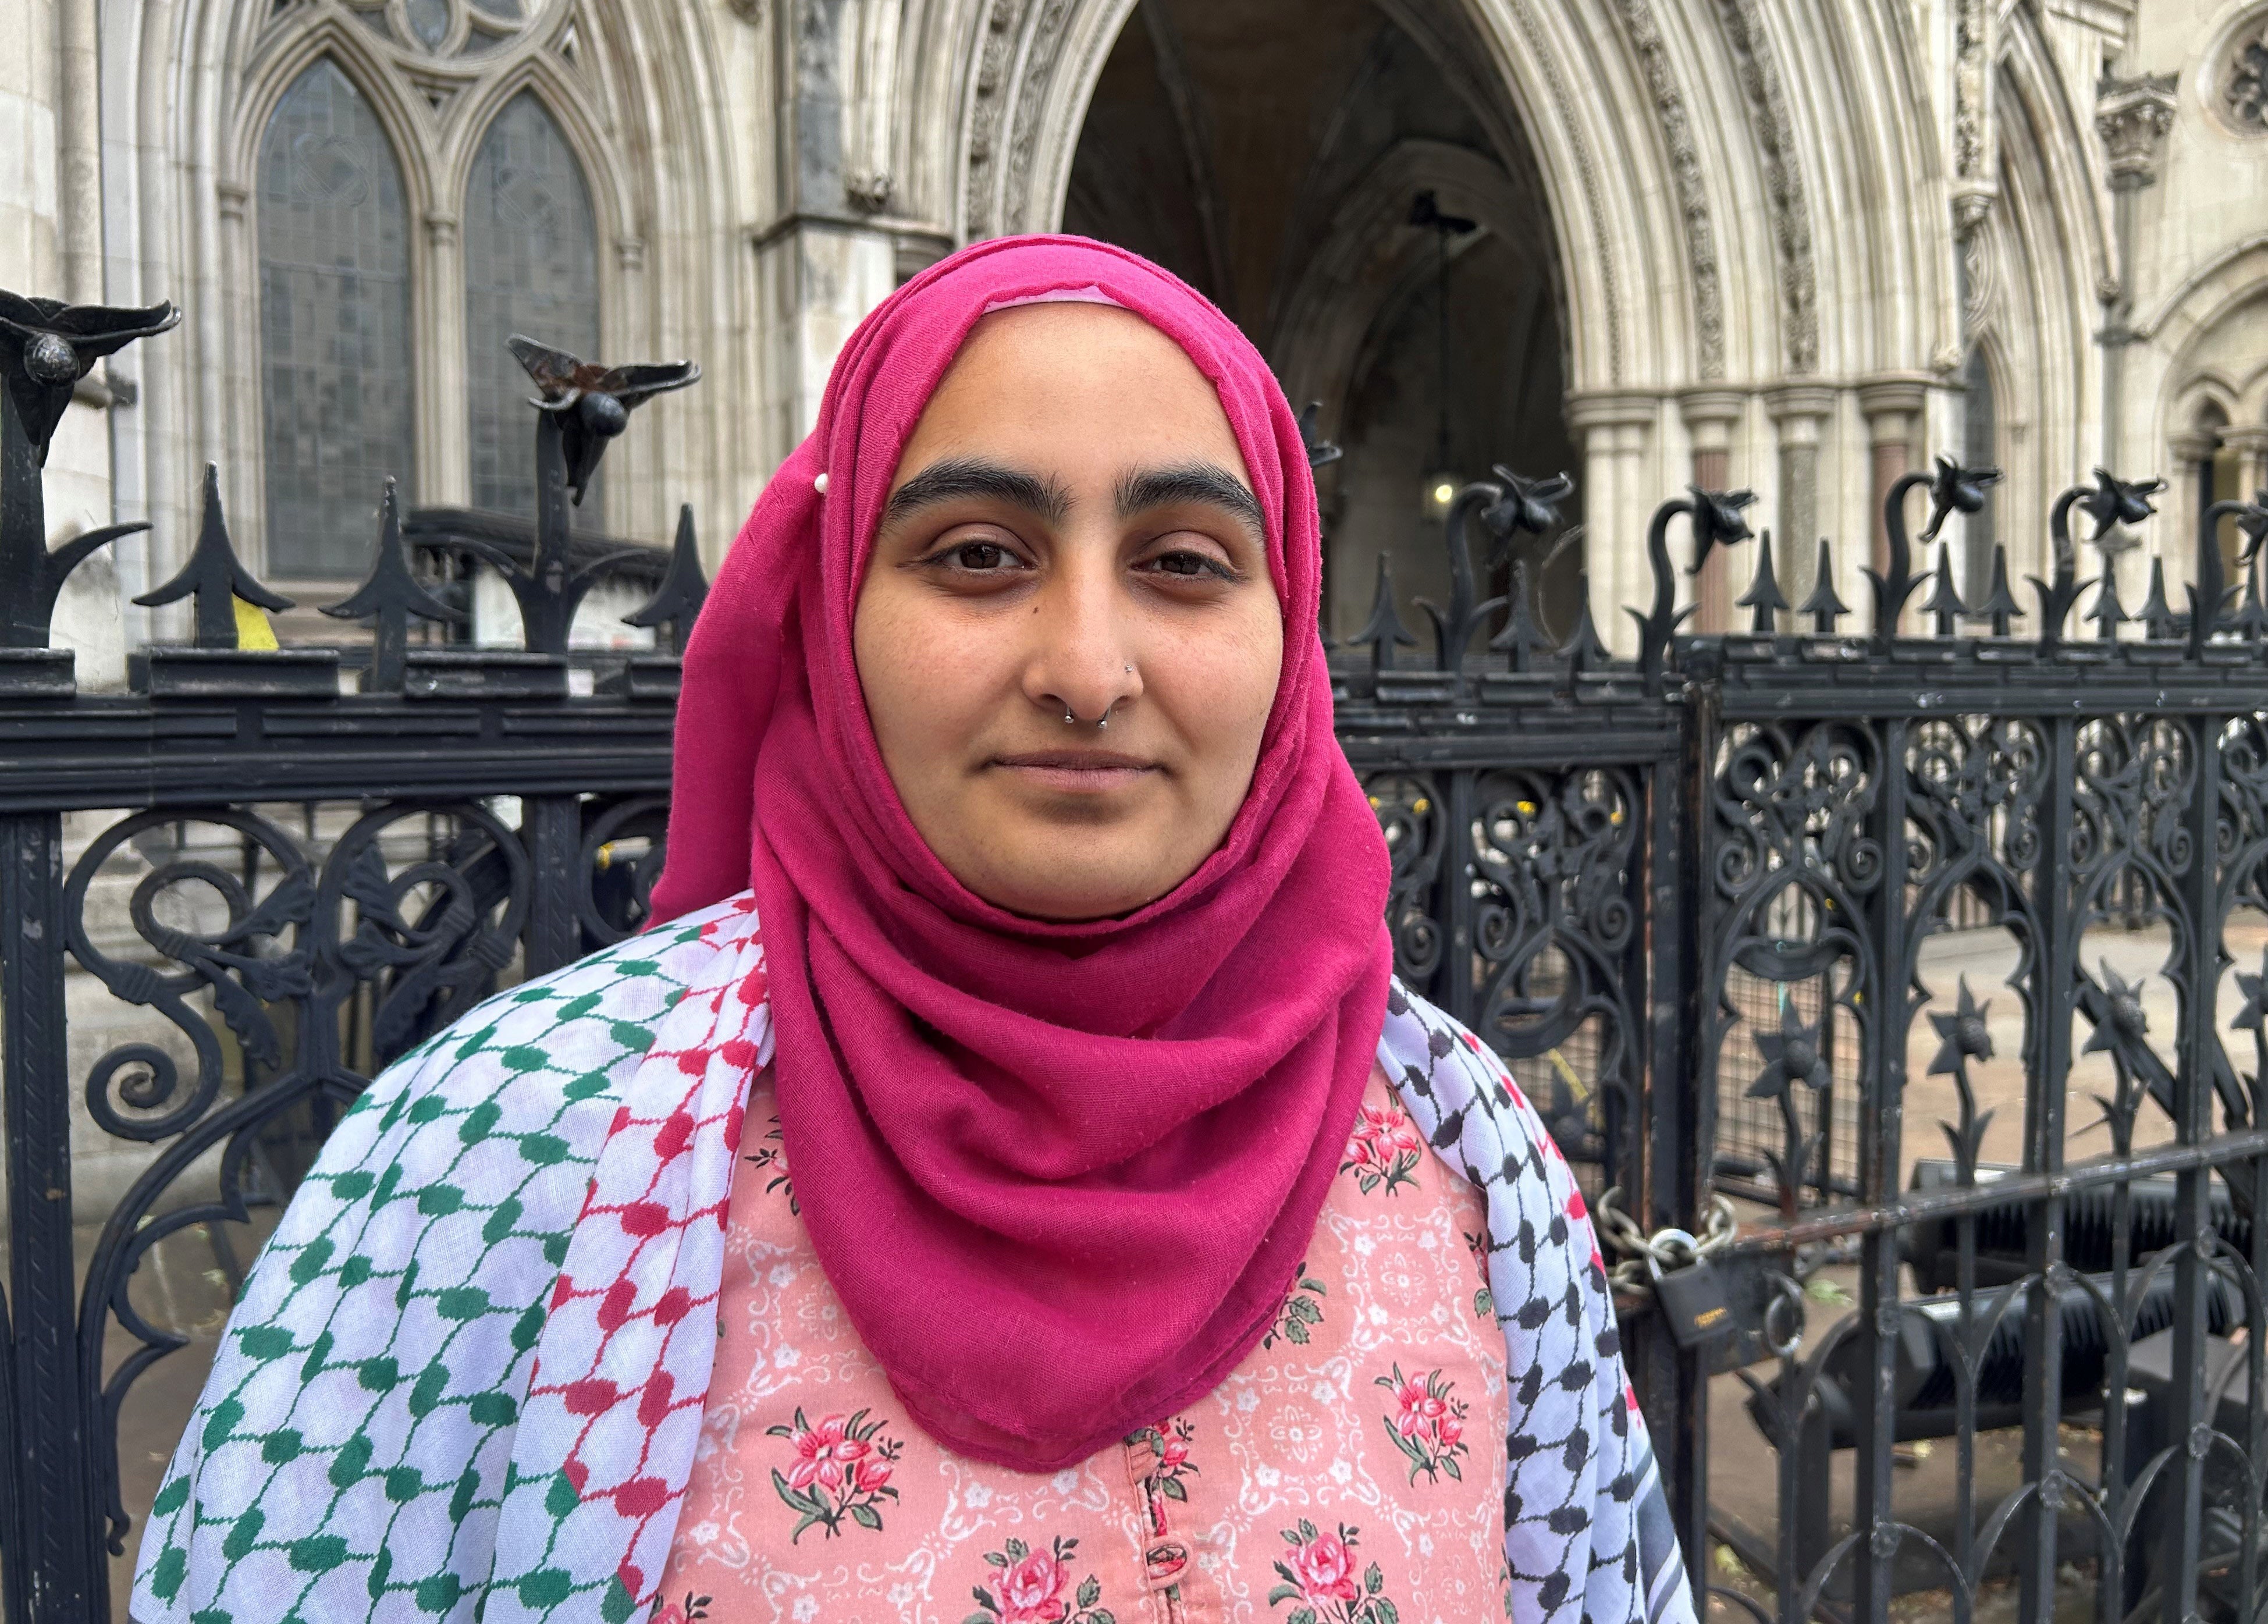 Mariyah Ali, a defendant in the Birmingham case, attended a hearing at the Royal Courts of Justice in London earlier this month (Tom Pilgrim/PA)